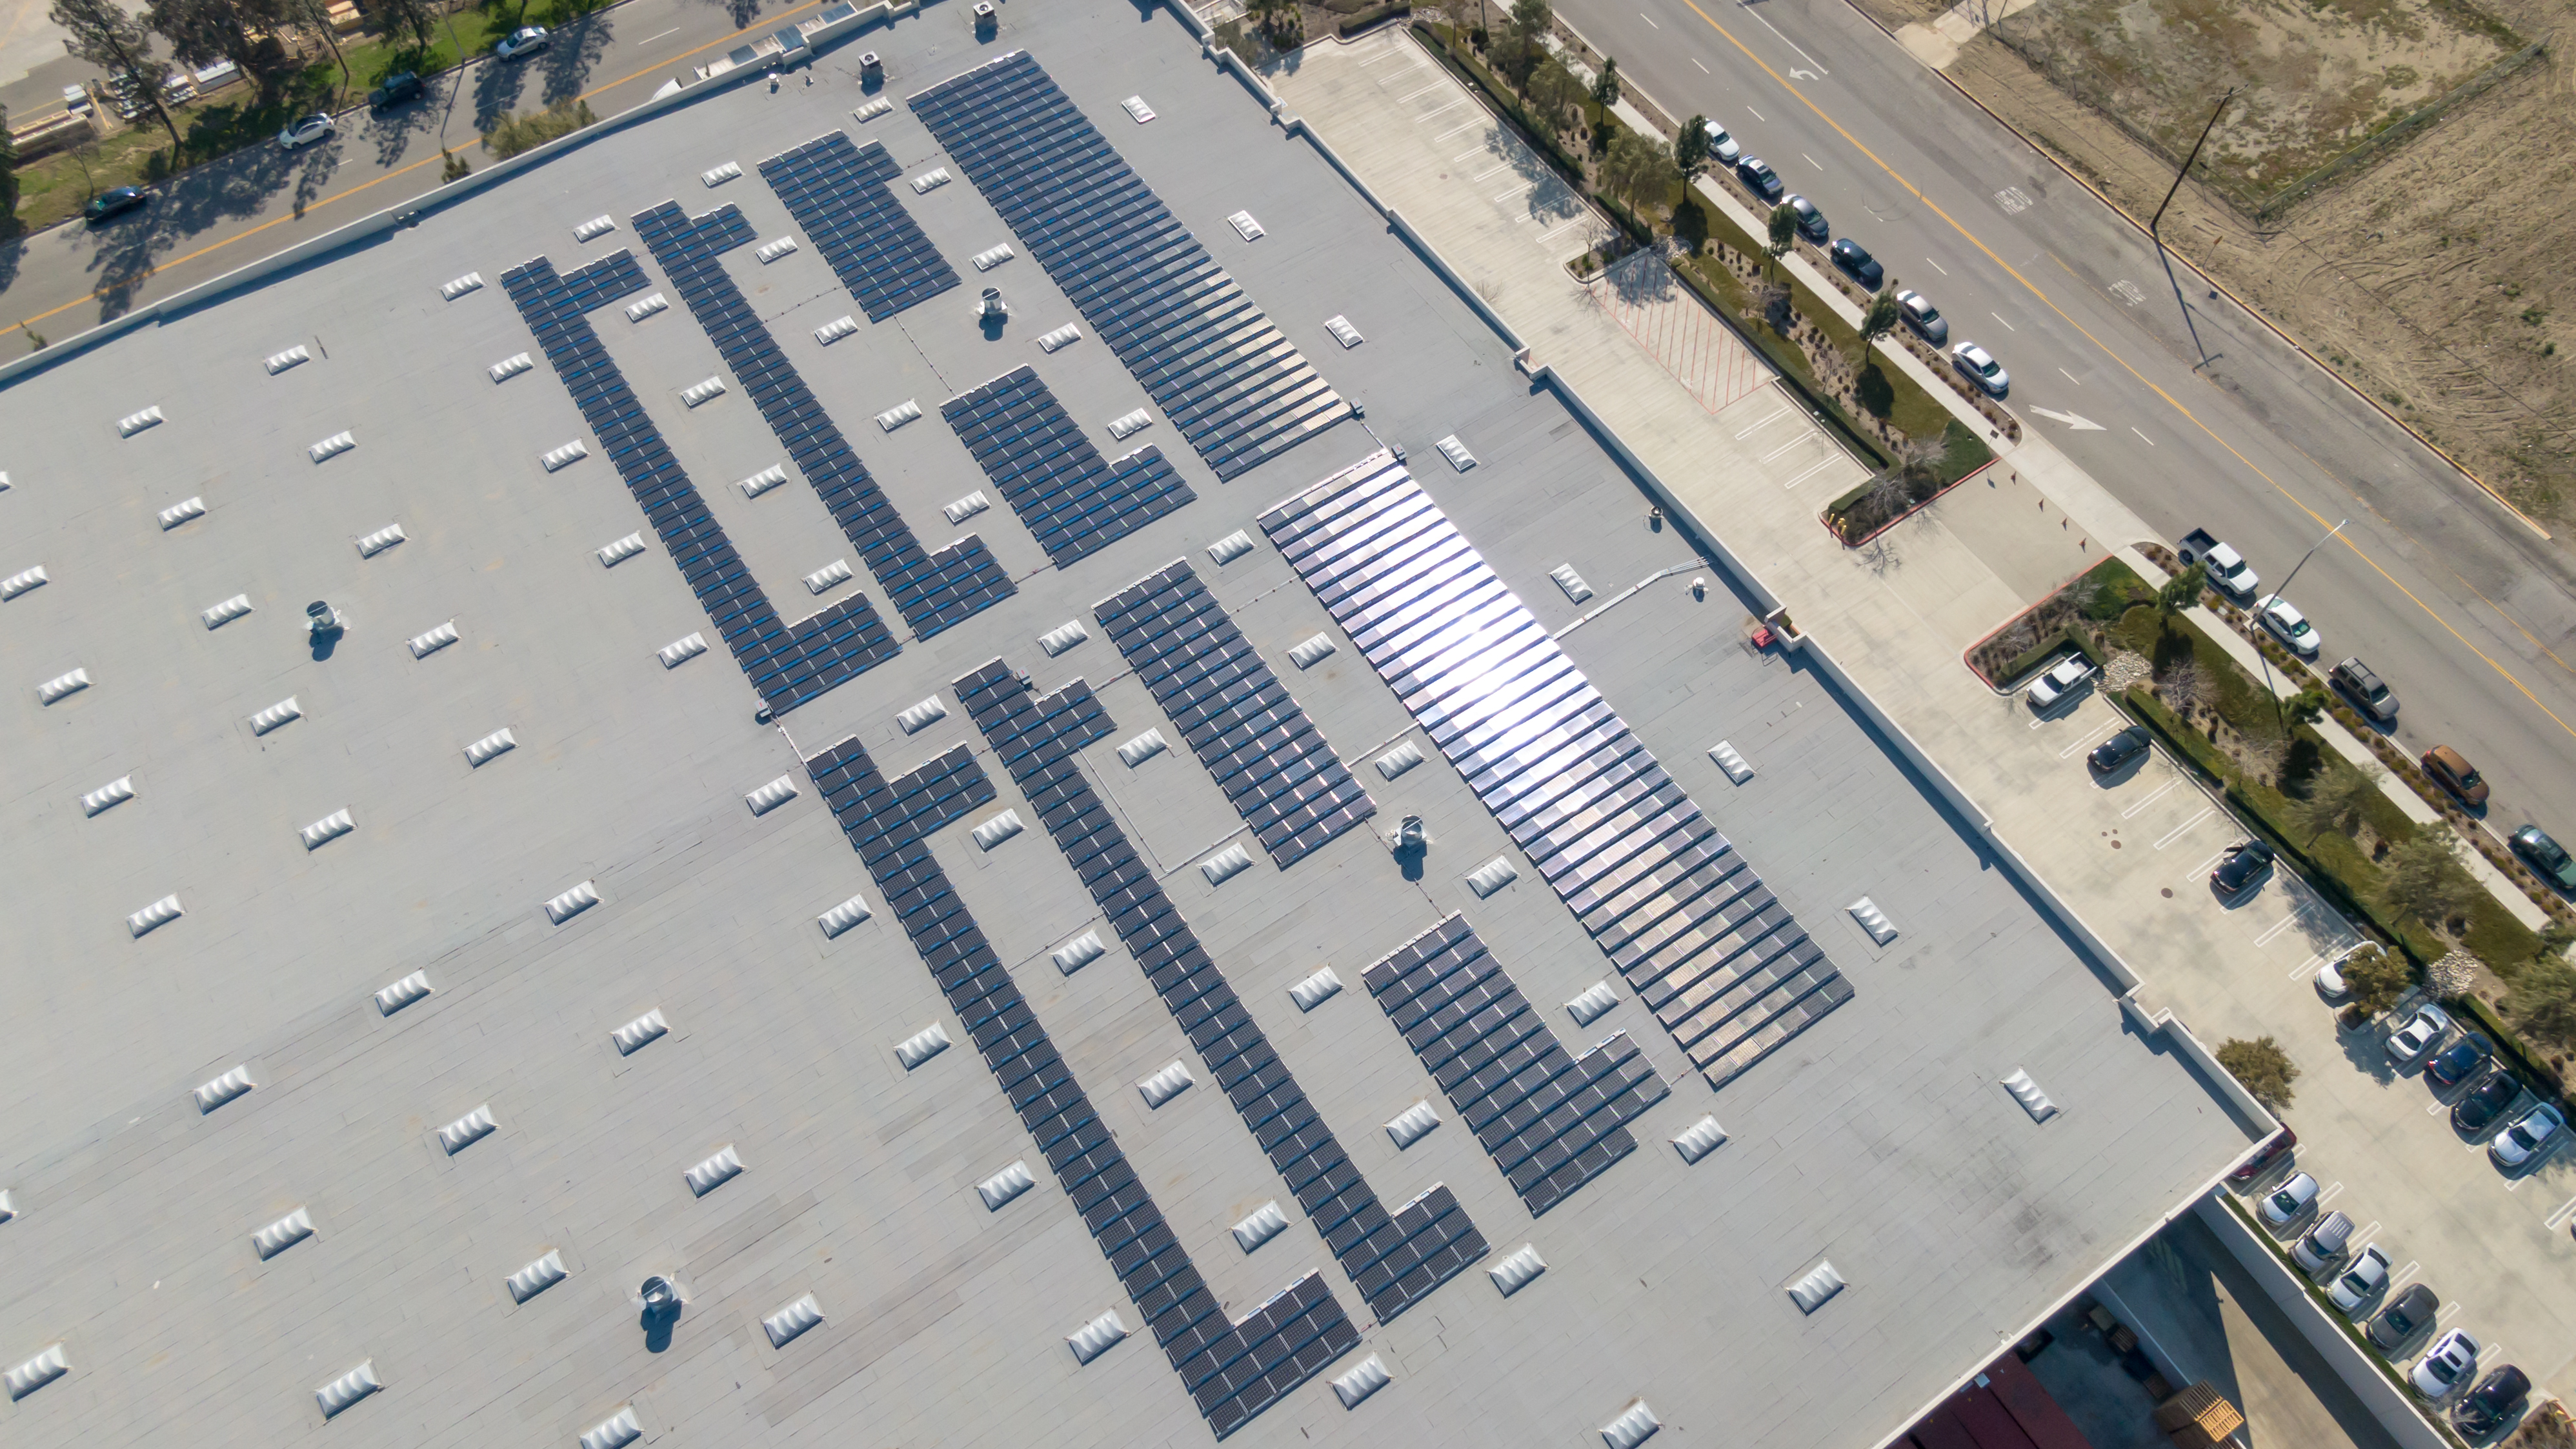 Commercial Building with Ballasted Solar Panels